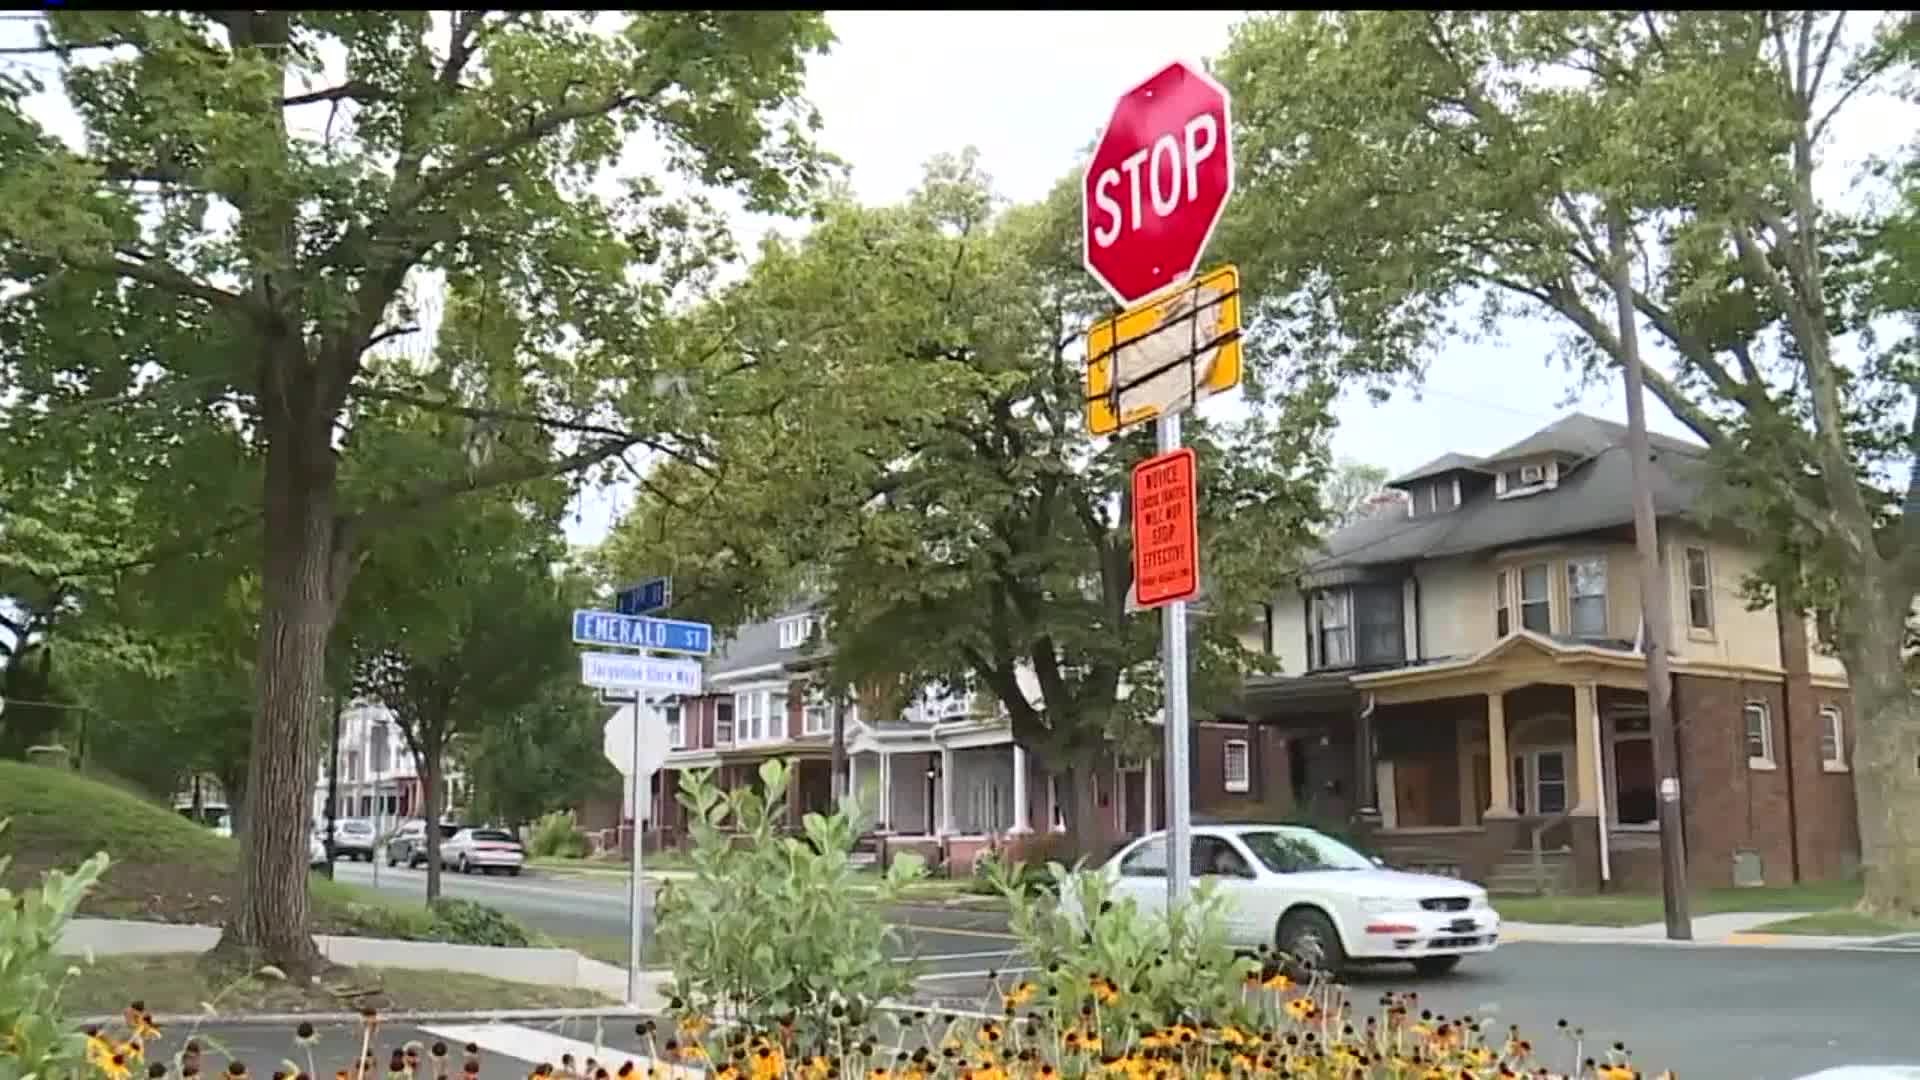 Concerns over planned stop sign removals in Harrisburg city